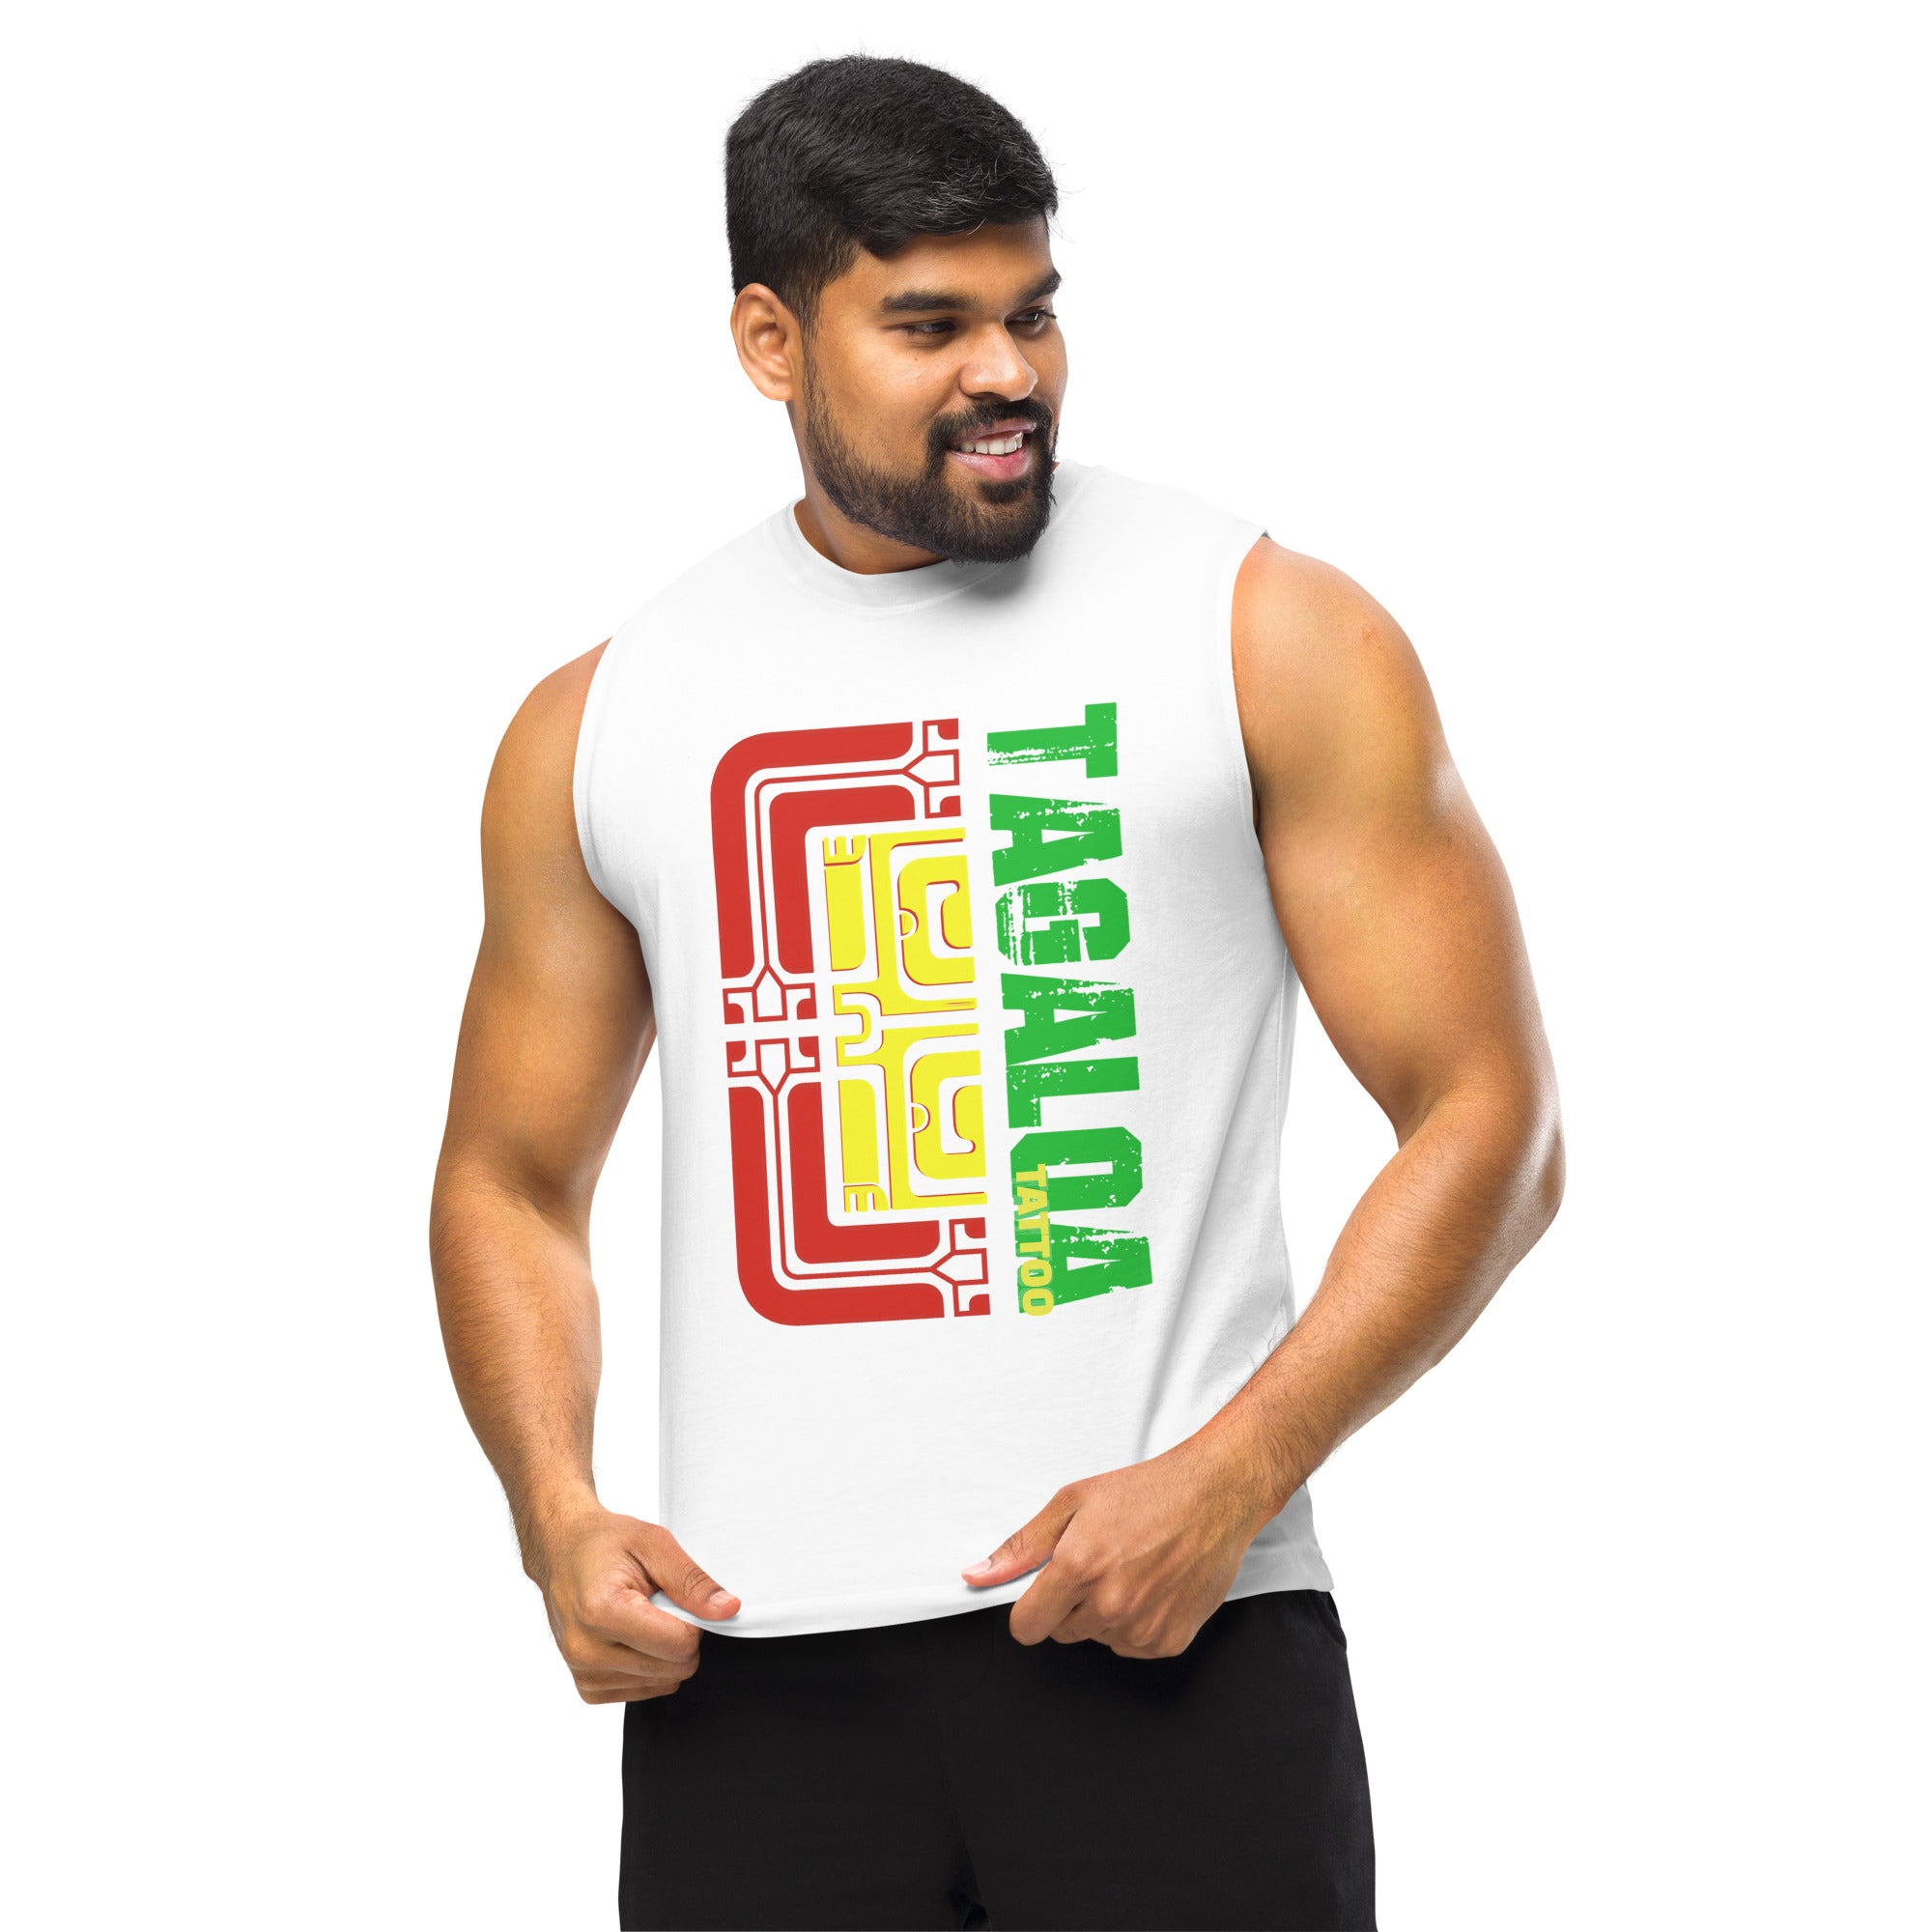 Vibrant Tagaloa Tattoo Tank Top in Green, Yellow, and Red